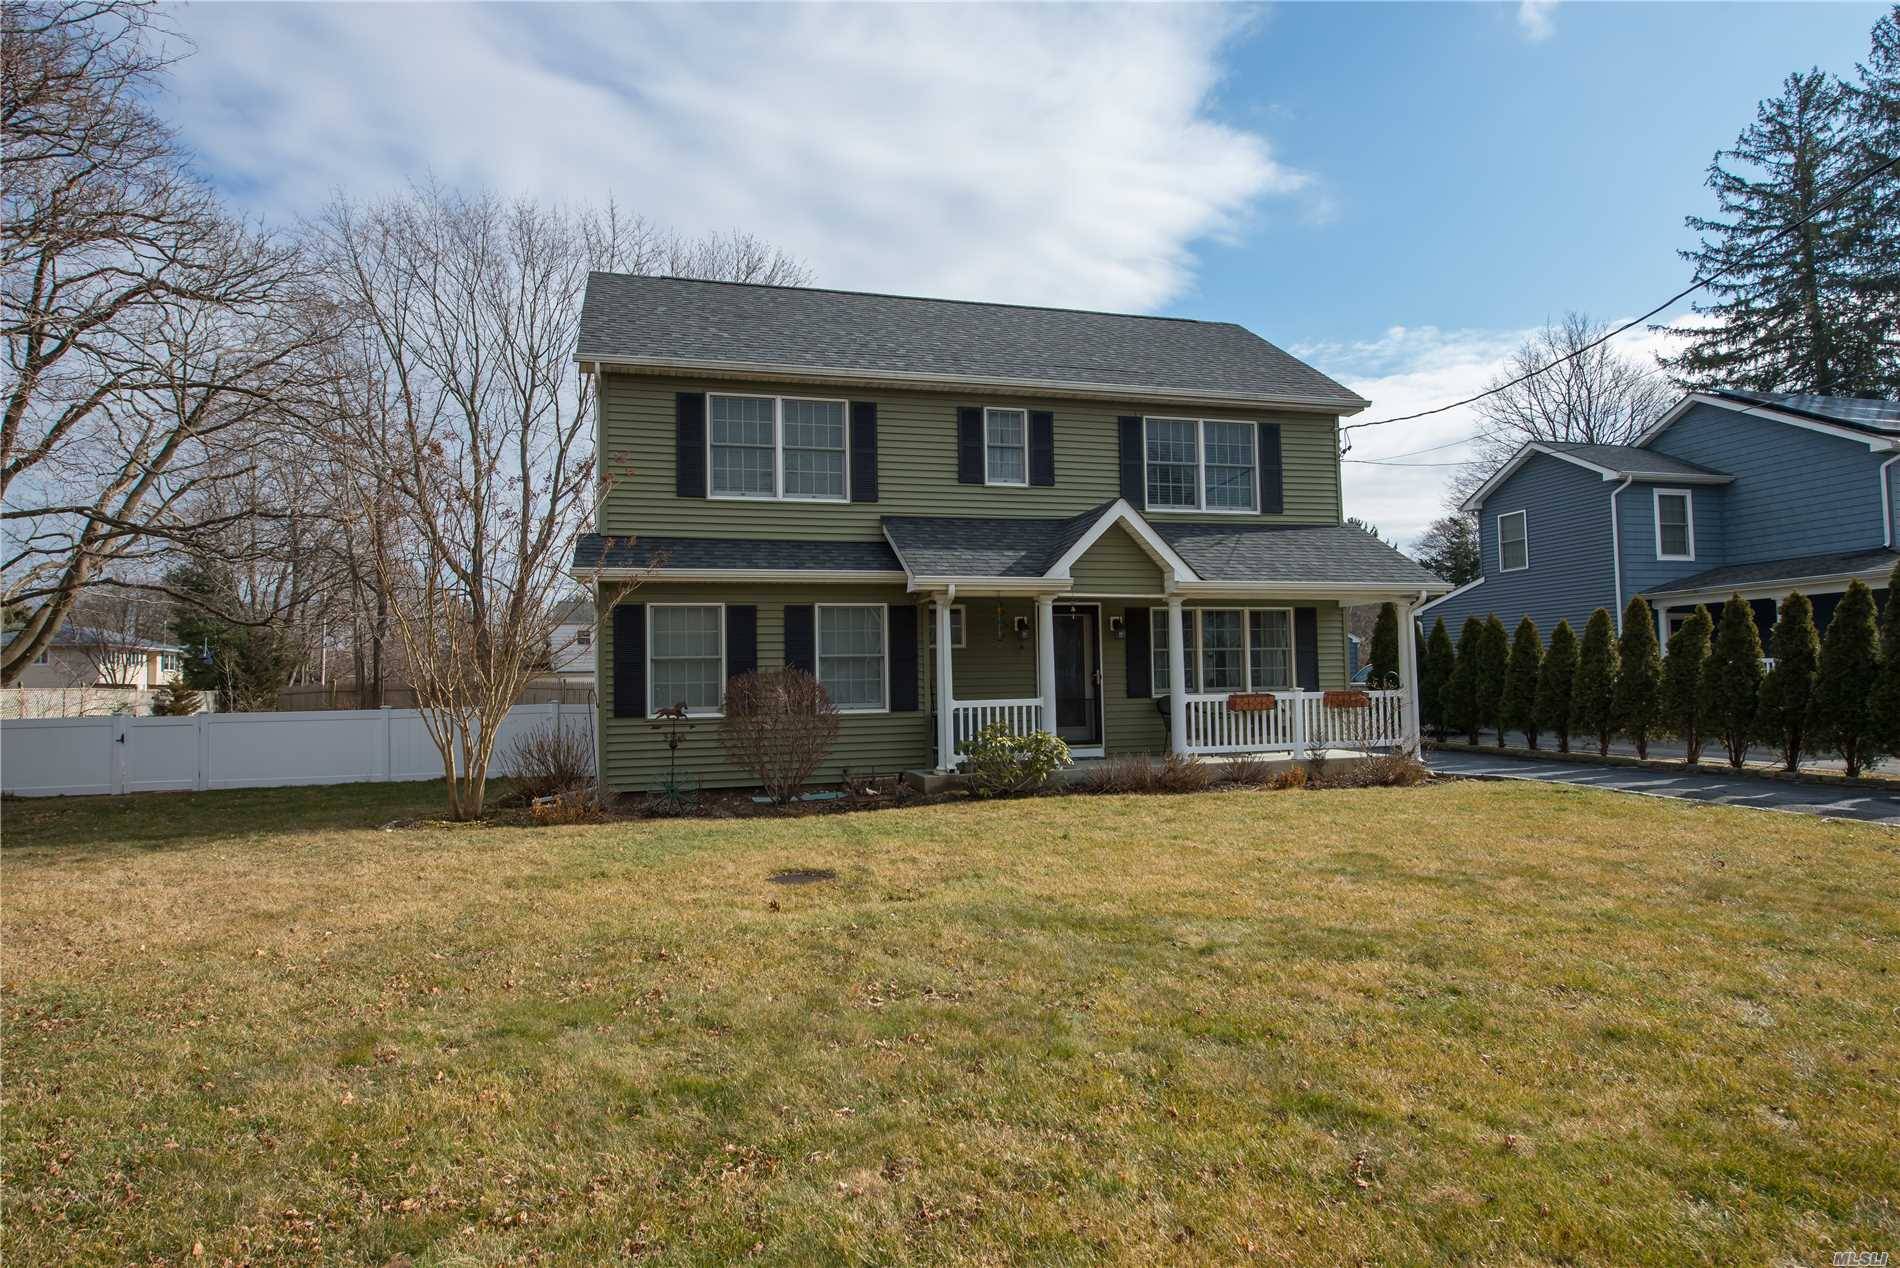 Move Right Into This Charming 4 Bedroom, 3 Bath Colonial In The Heart Of St.